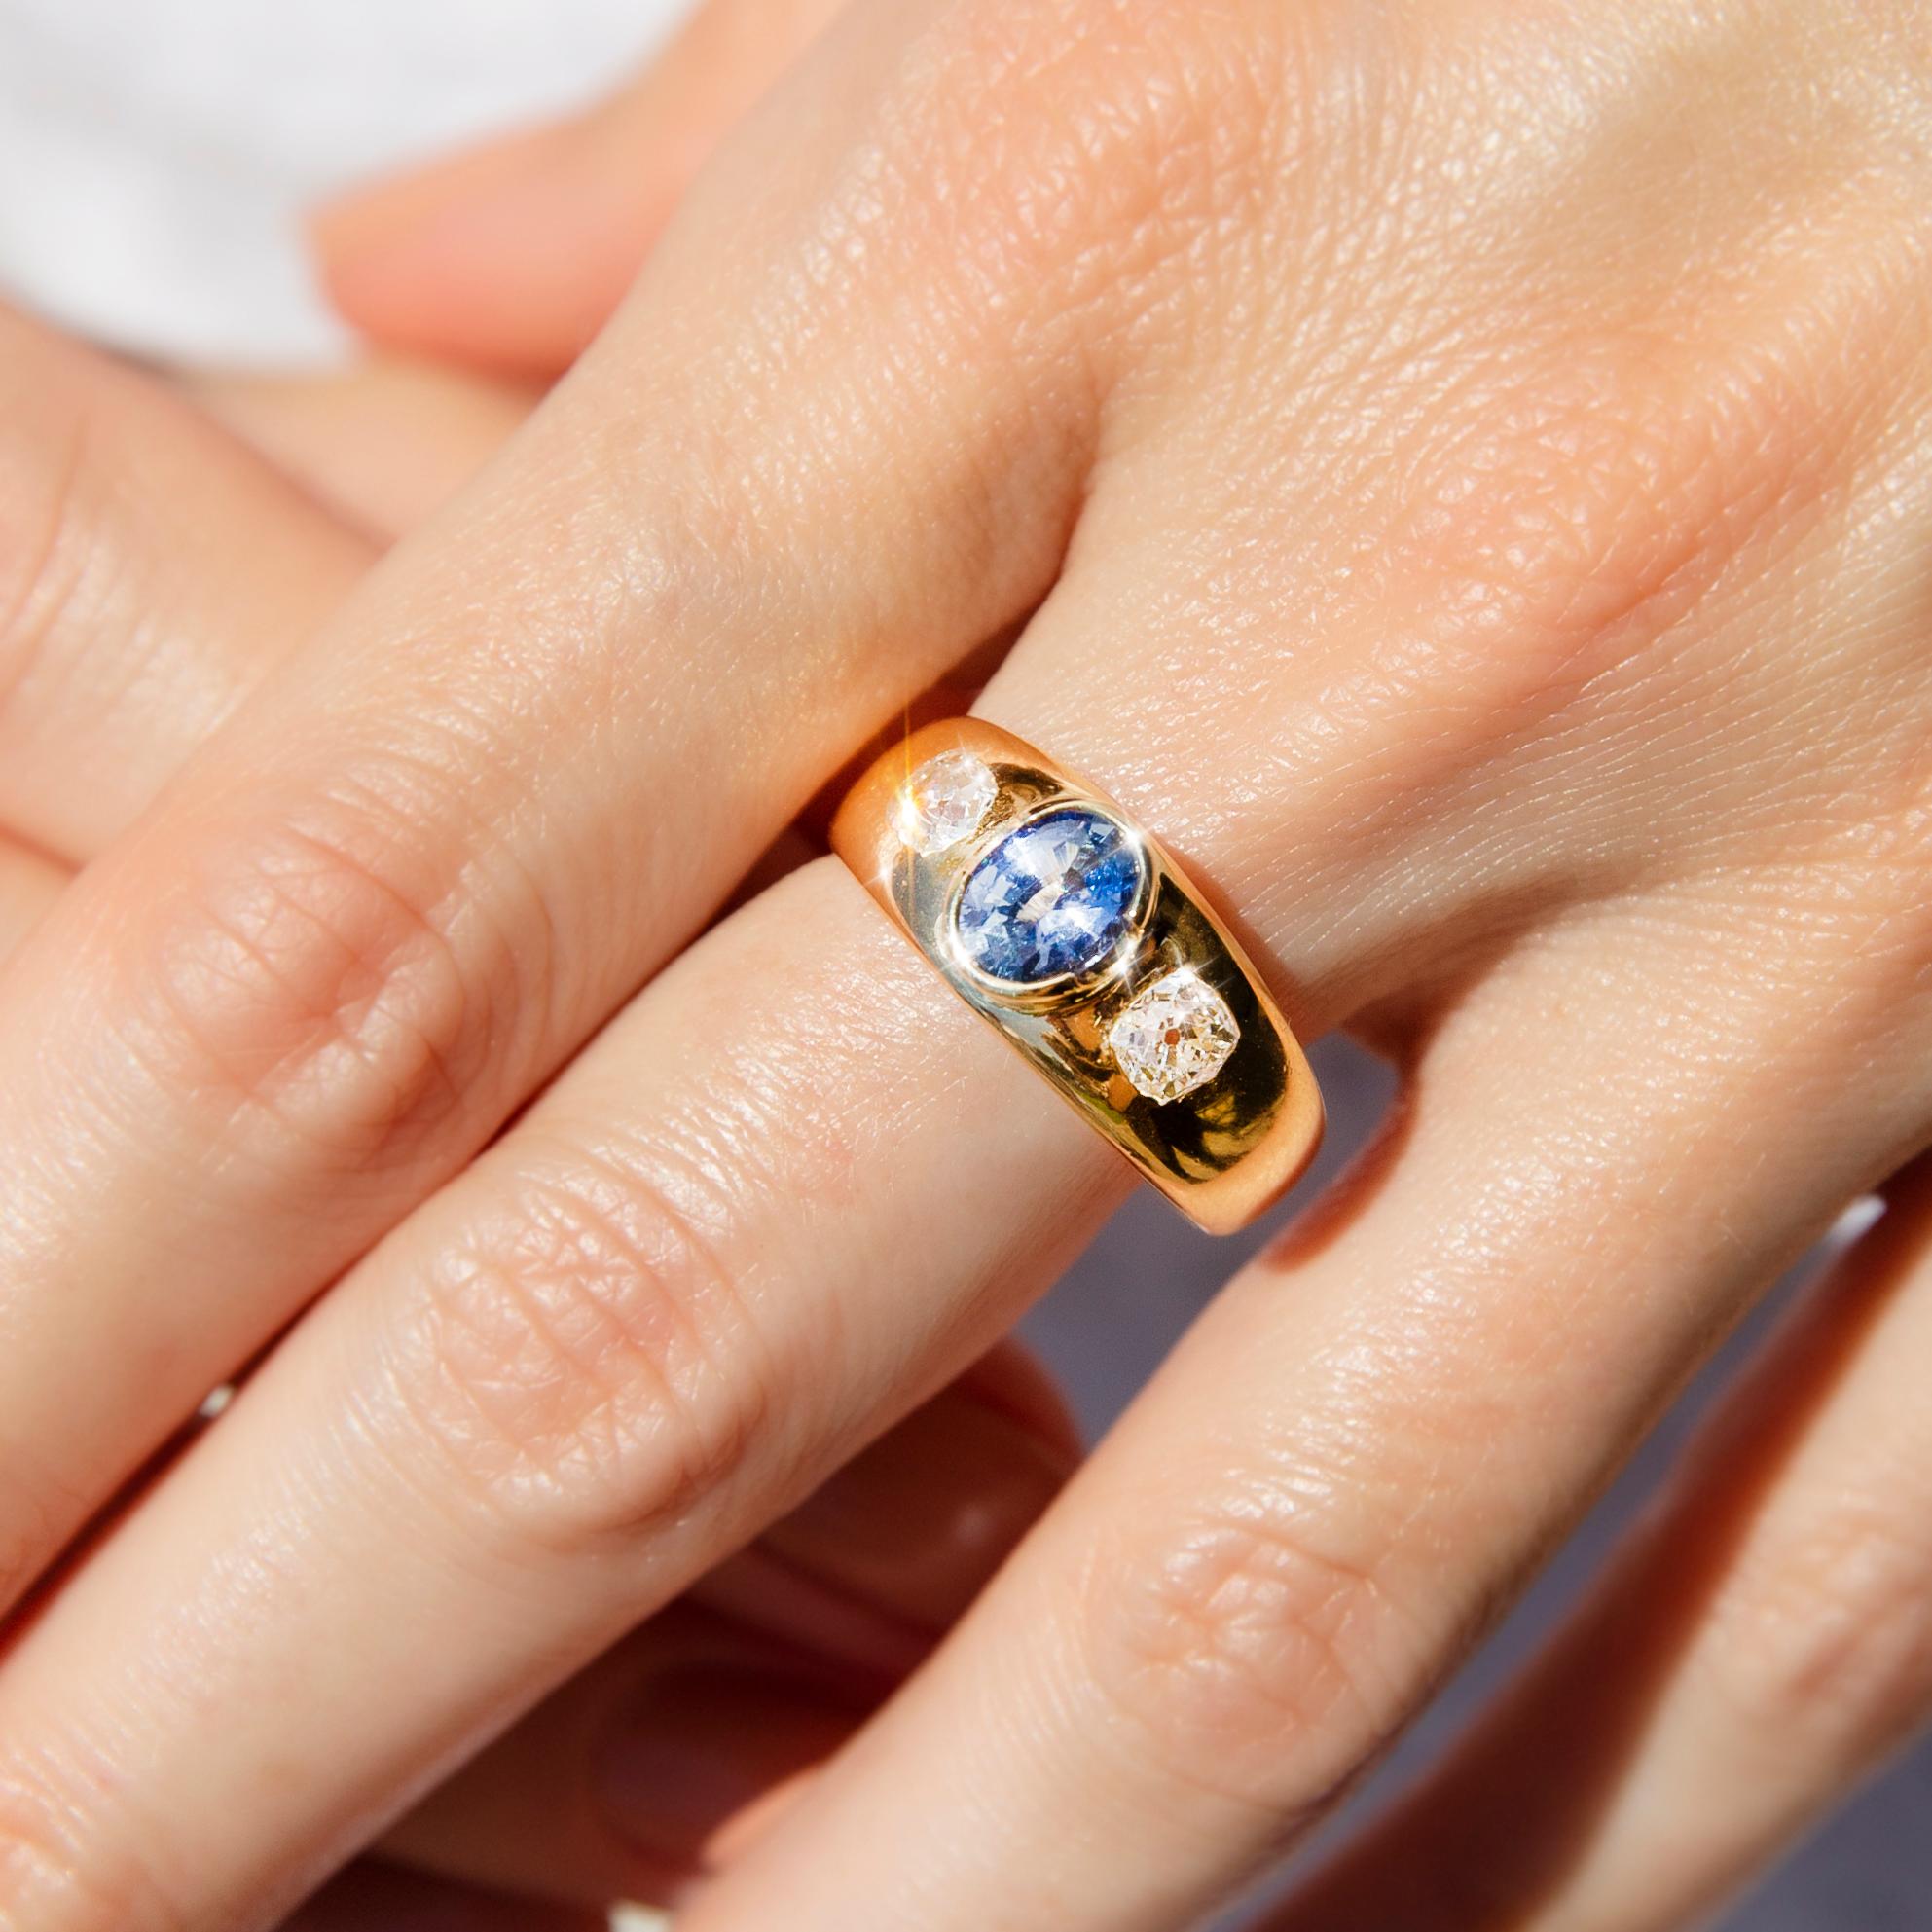 Forged in gleaming 18 carat yellow gold, this gorgeous Victorian-era trilogy ring features a darling oval mid-blue Ceylon-type sapphire in an elegant partial rubover setting between a duo of shimmering Old Mine Cut diamonds. This antique splendour